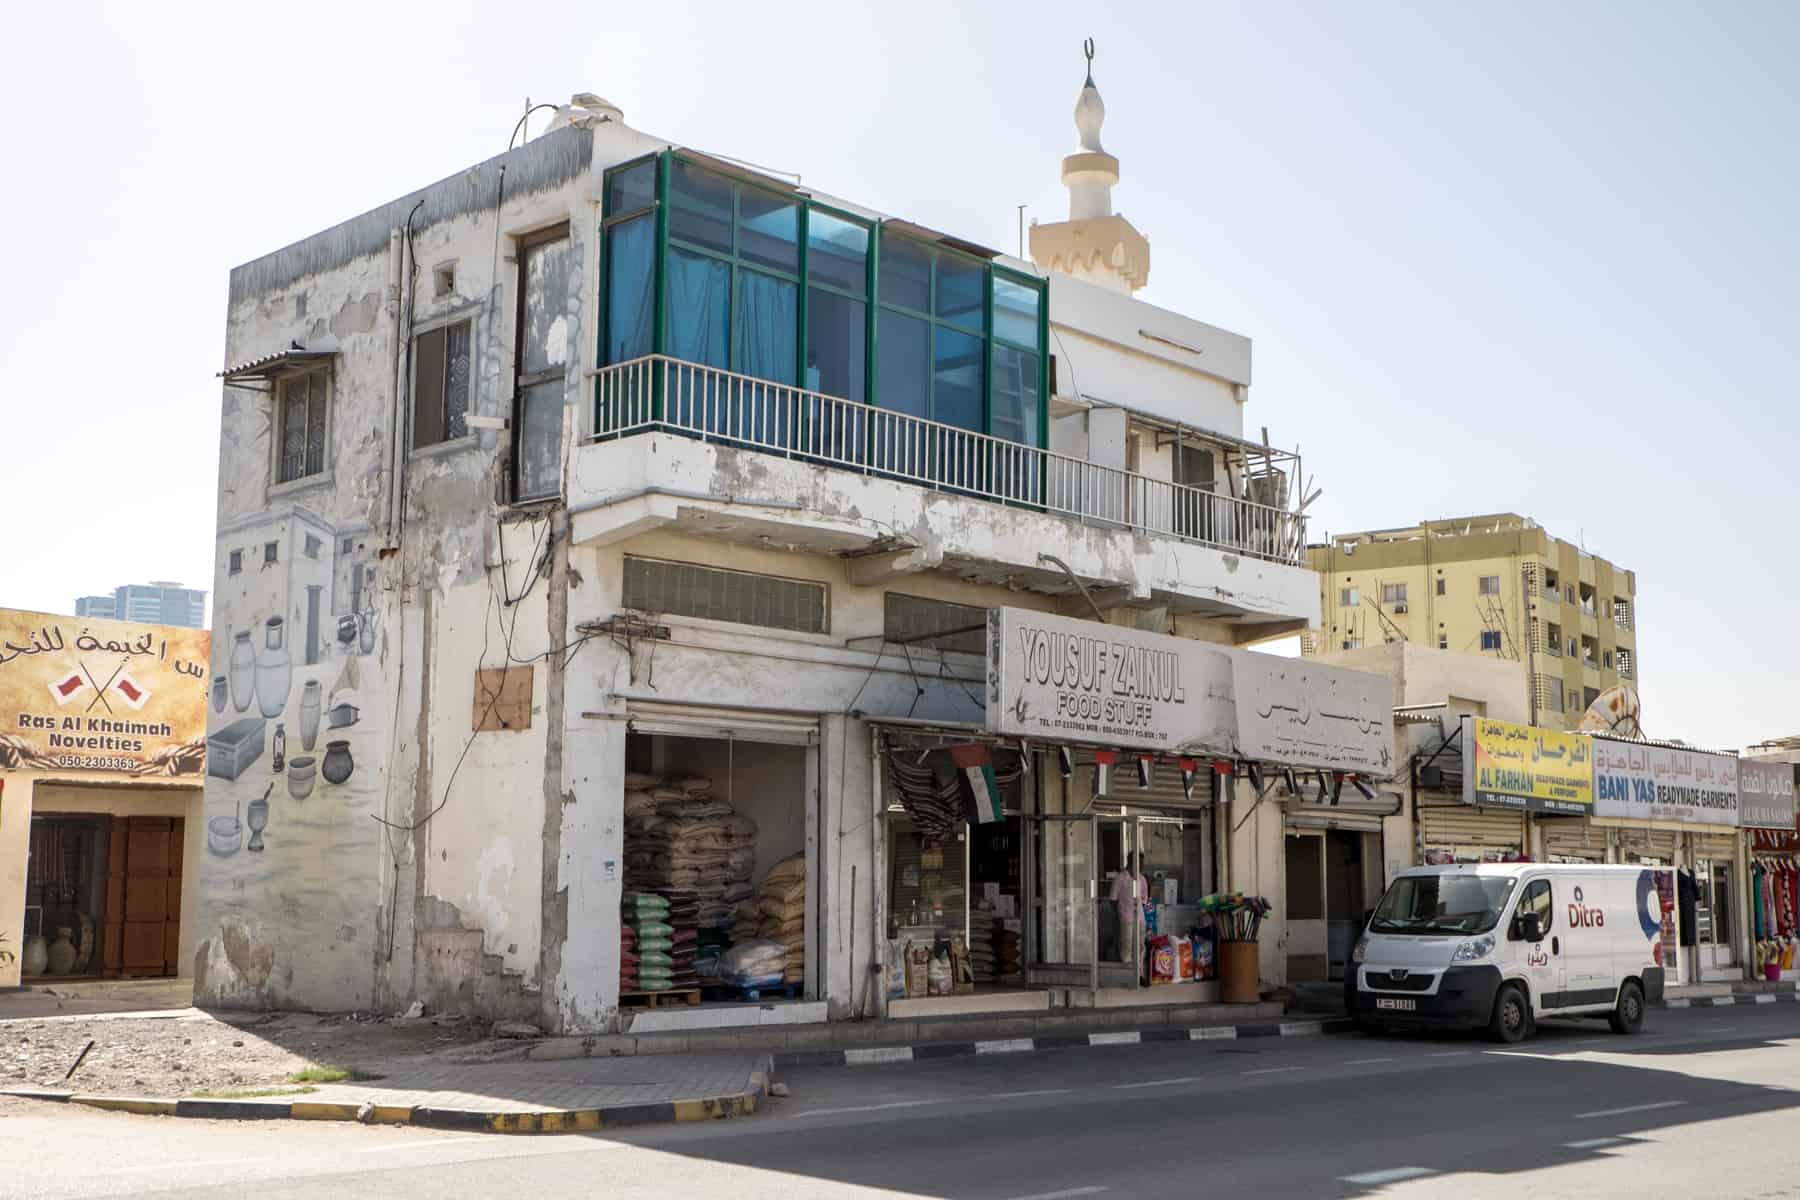 A small row of store-fronts in Ras Al Khaimah selling food and home wears